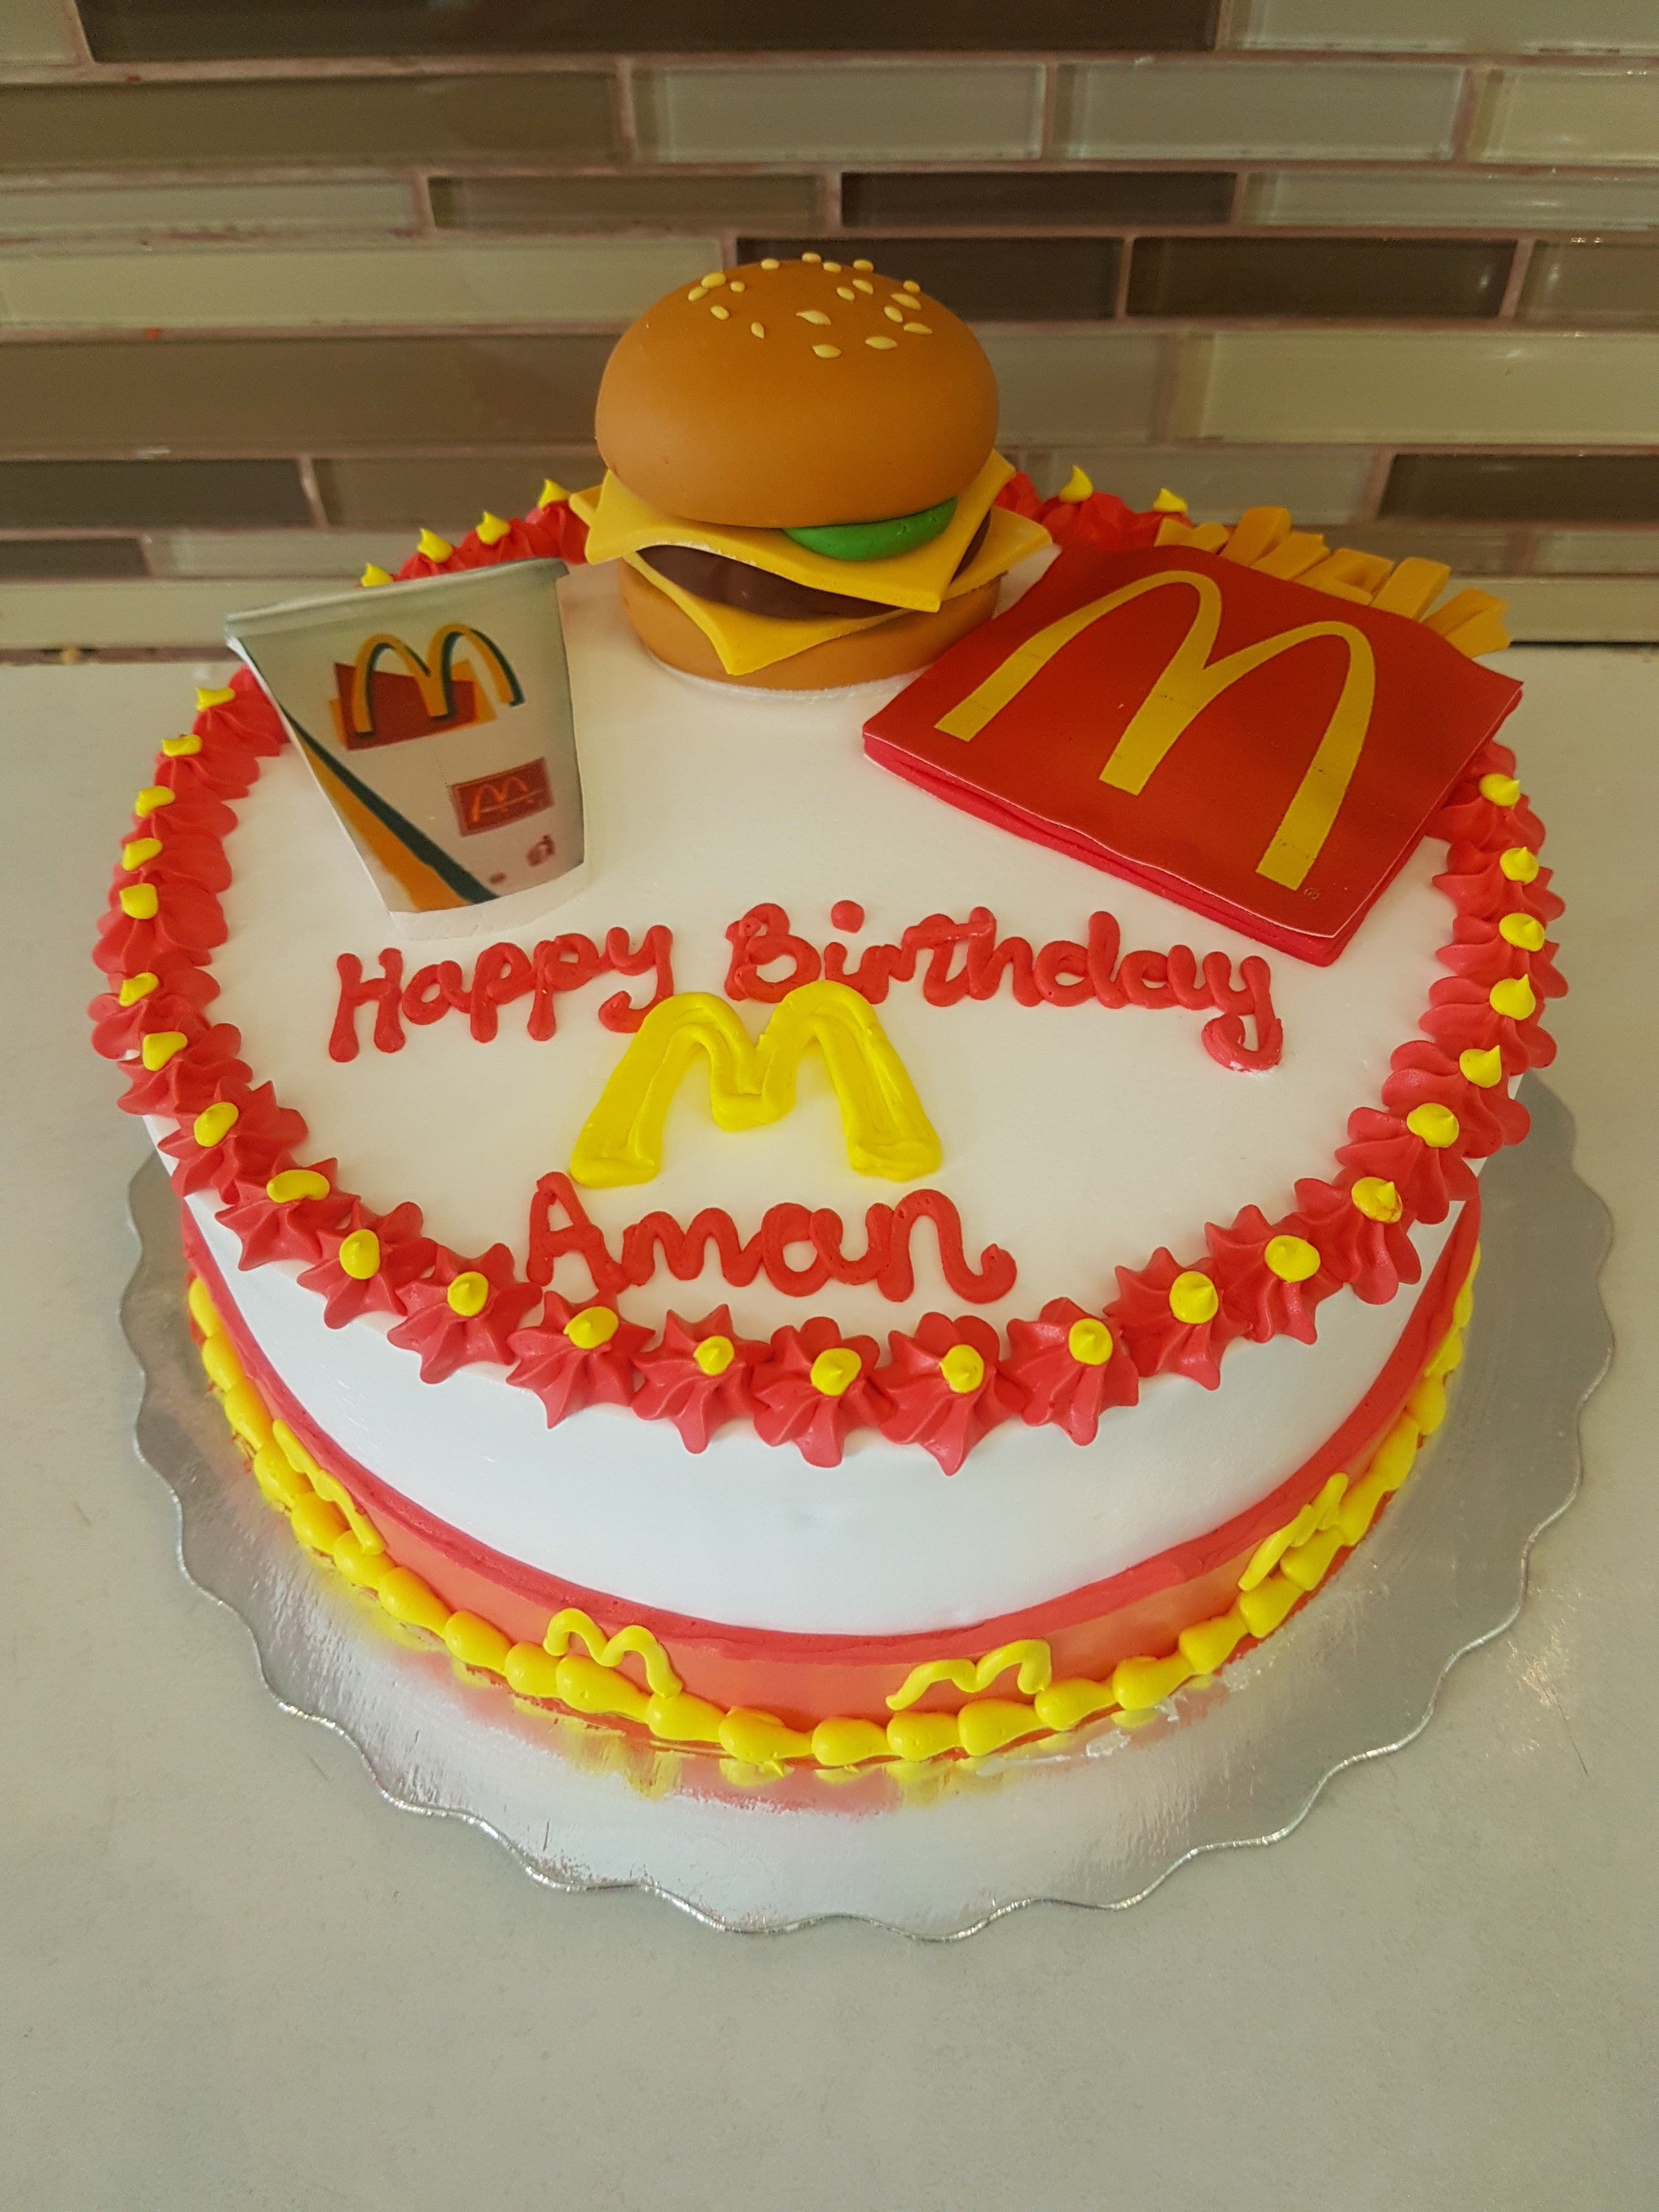 Does McDonald's Sell Cakes? The People Need to Know